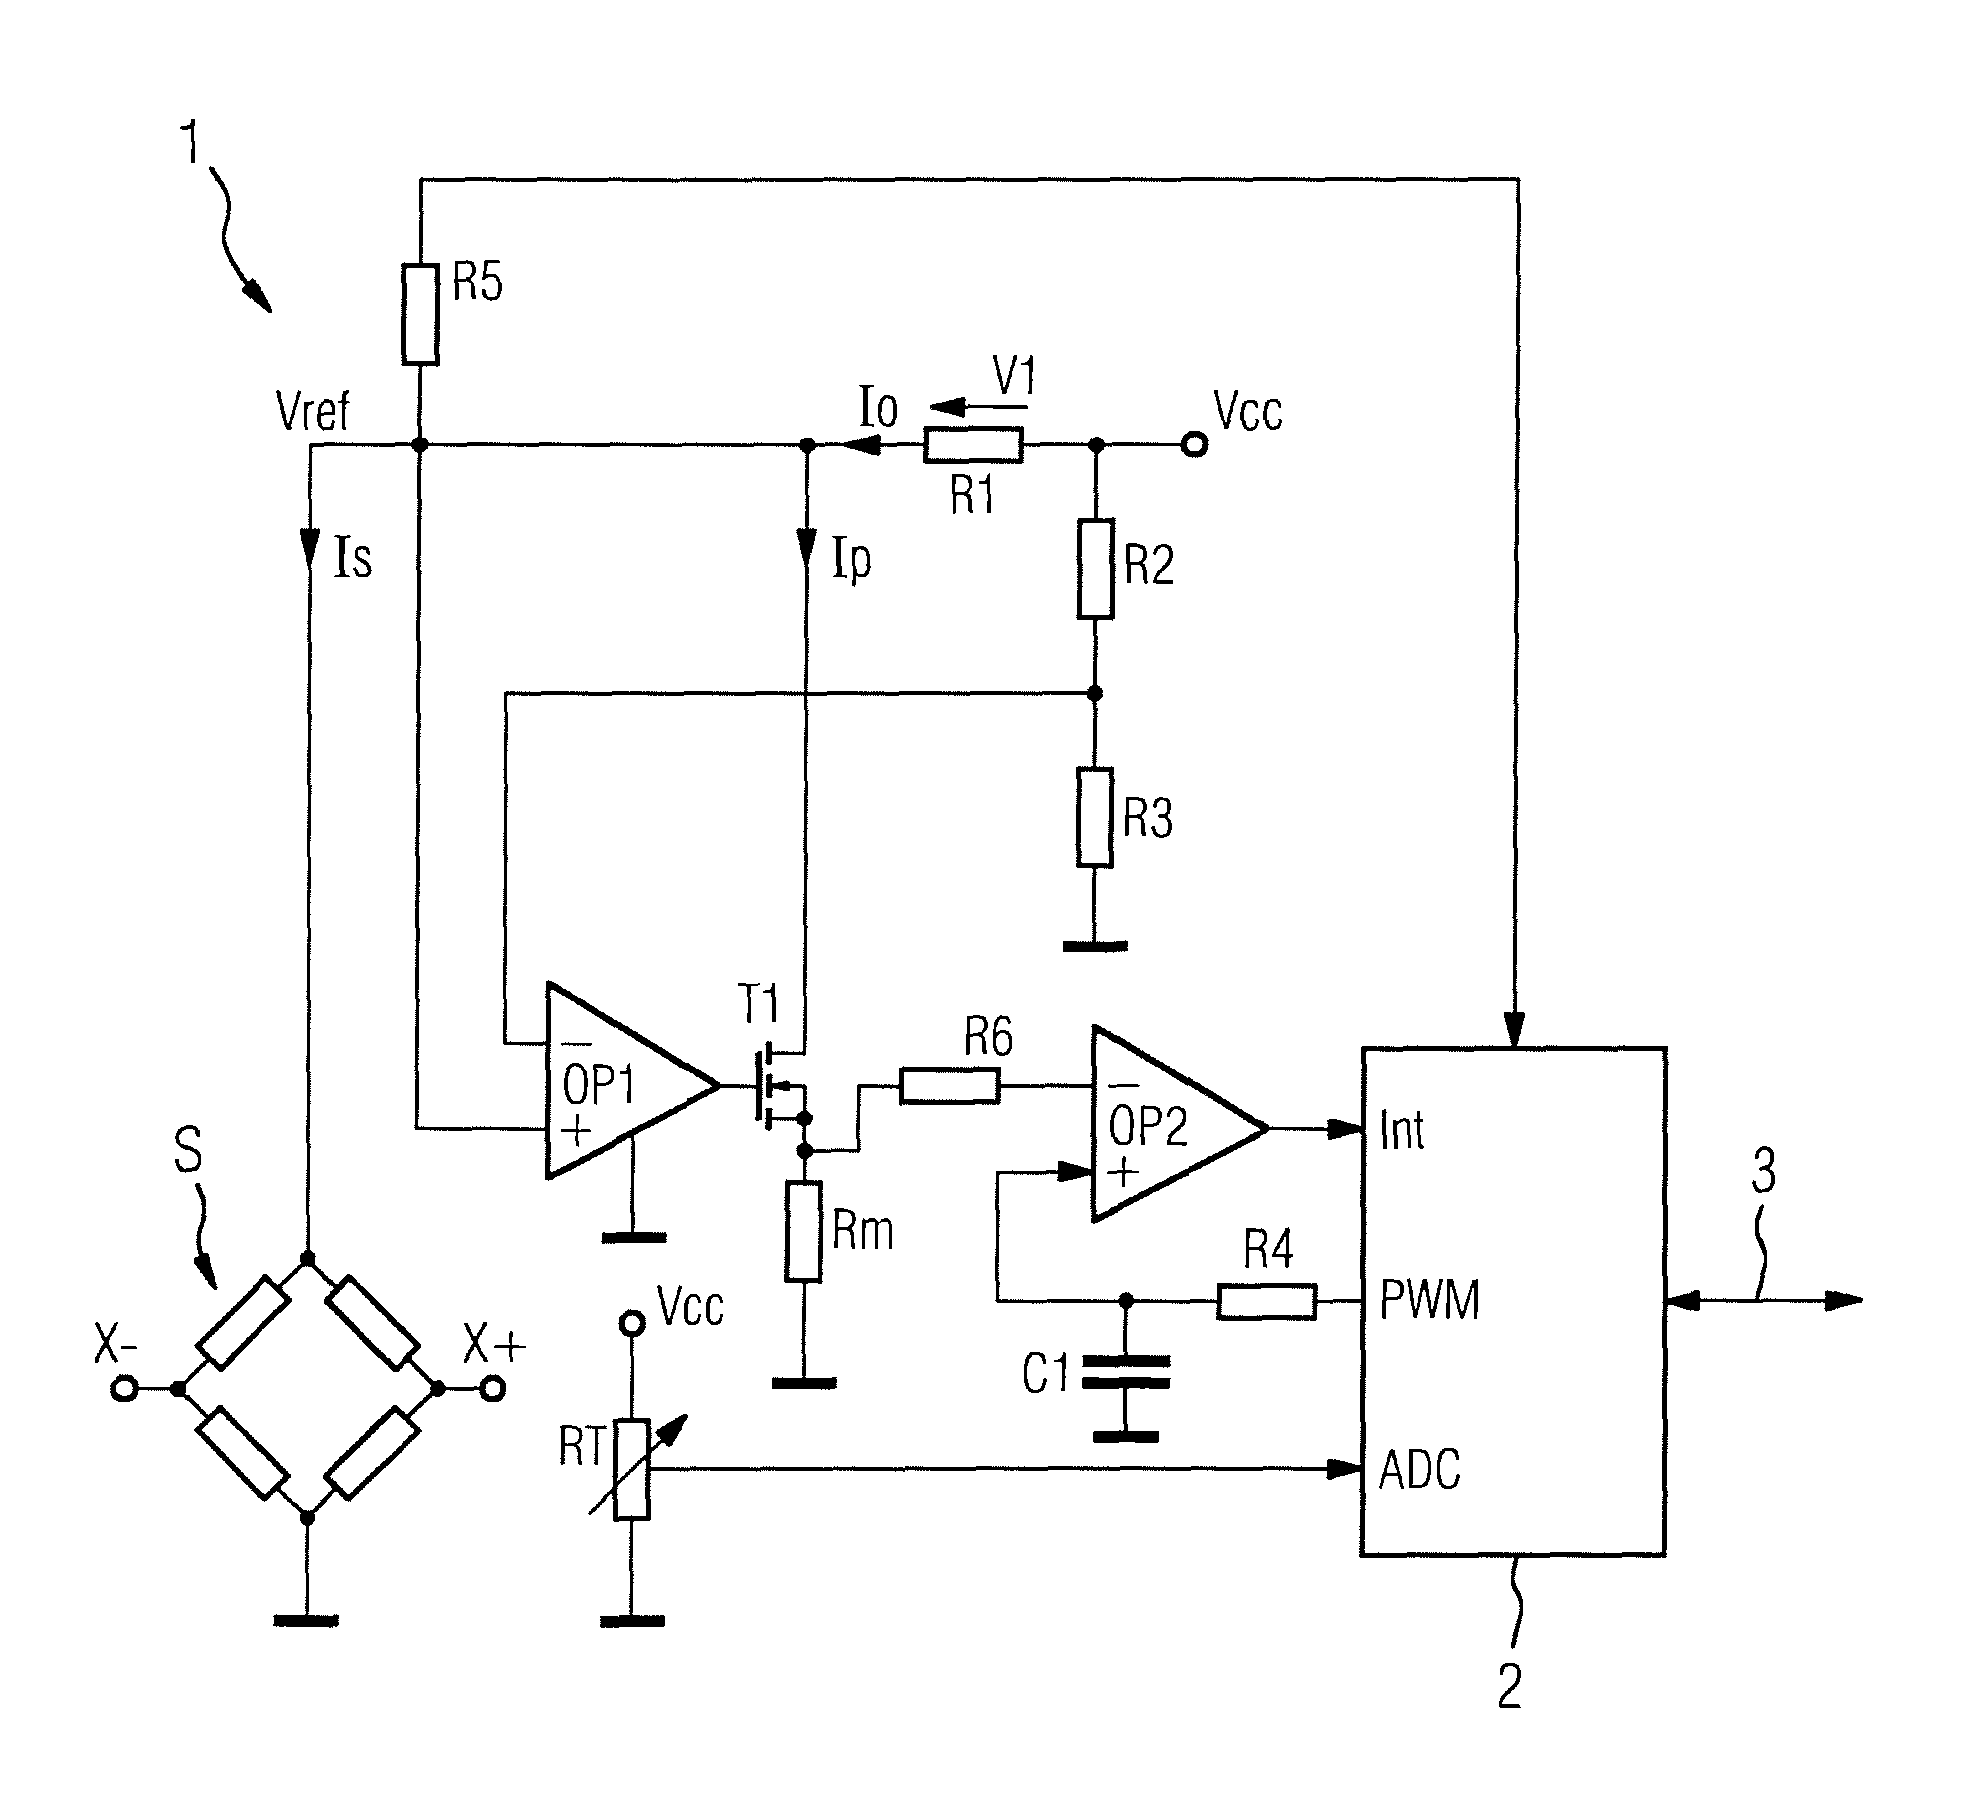 Measurement transducer for process instrumentation, and method for monitoring the state of its sensor